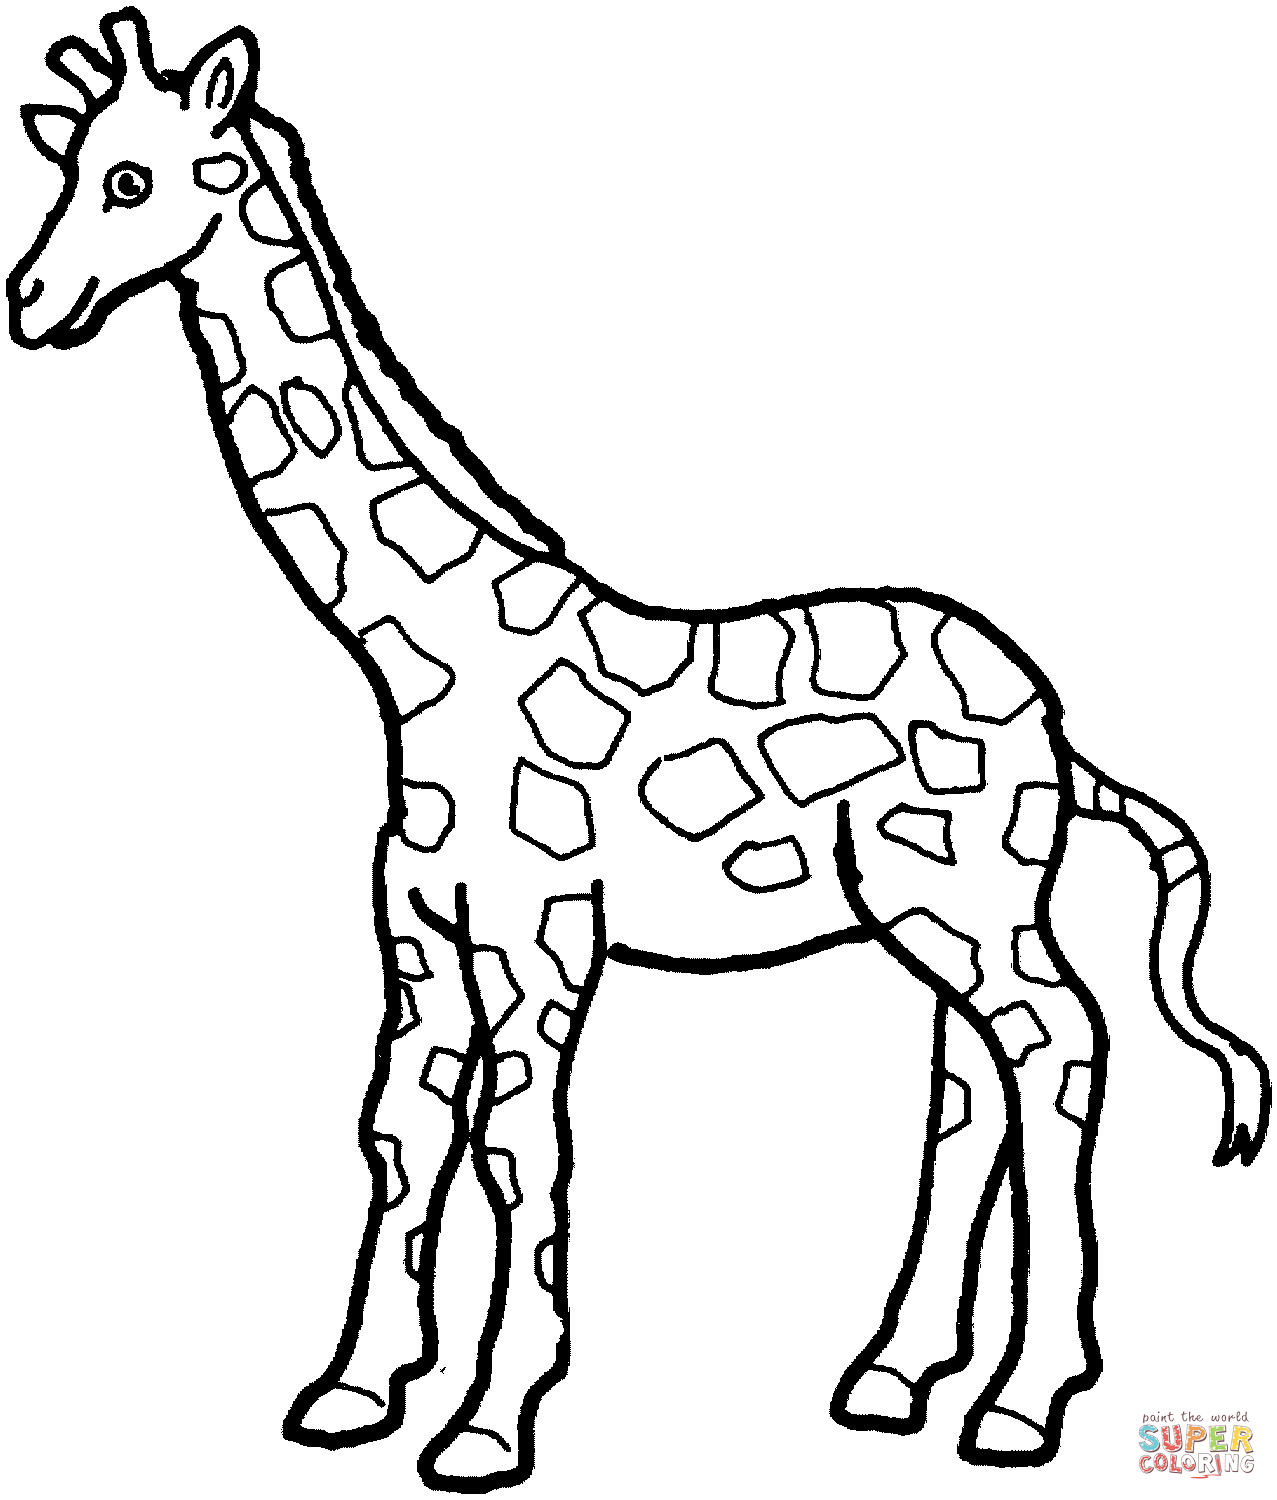 Giraffes coloring pages | Free Coloring Pages